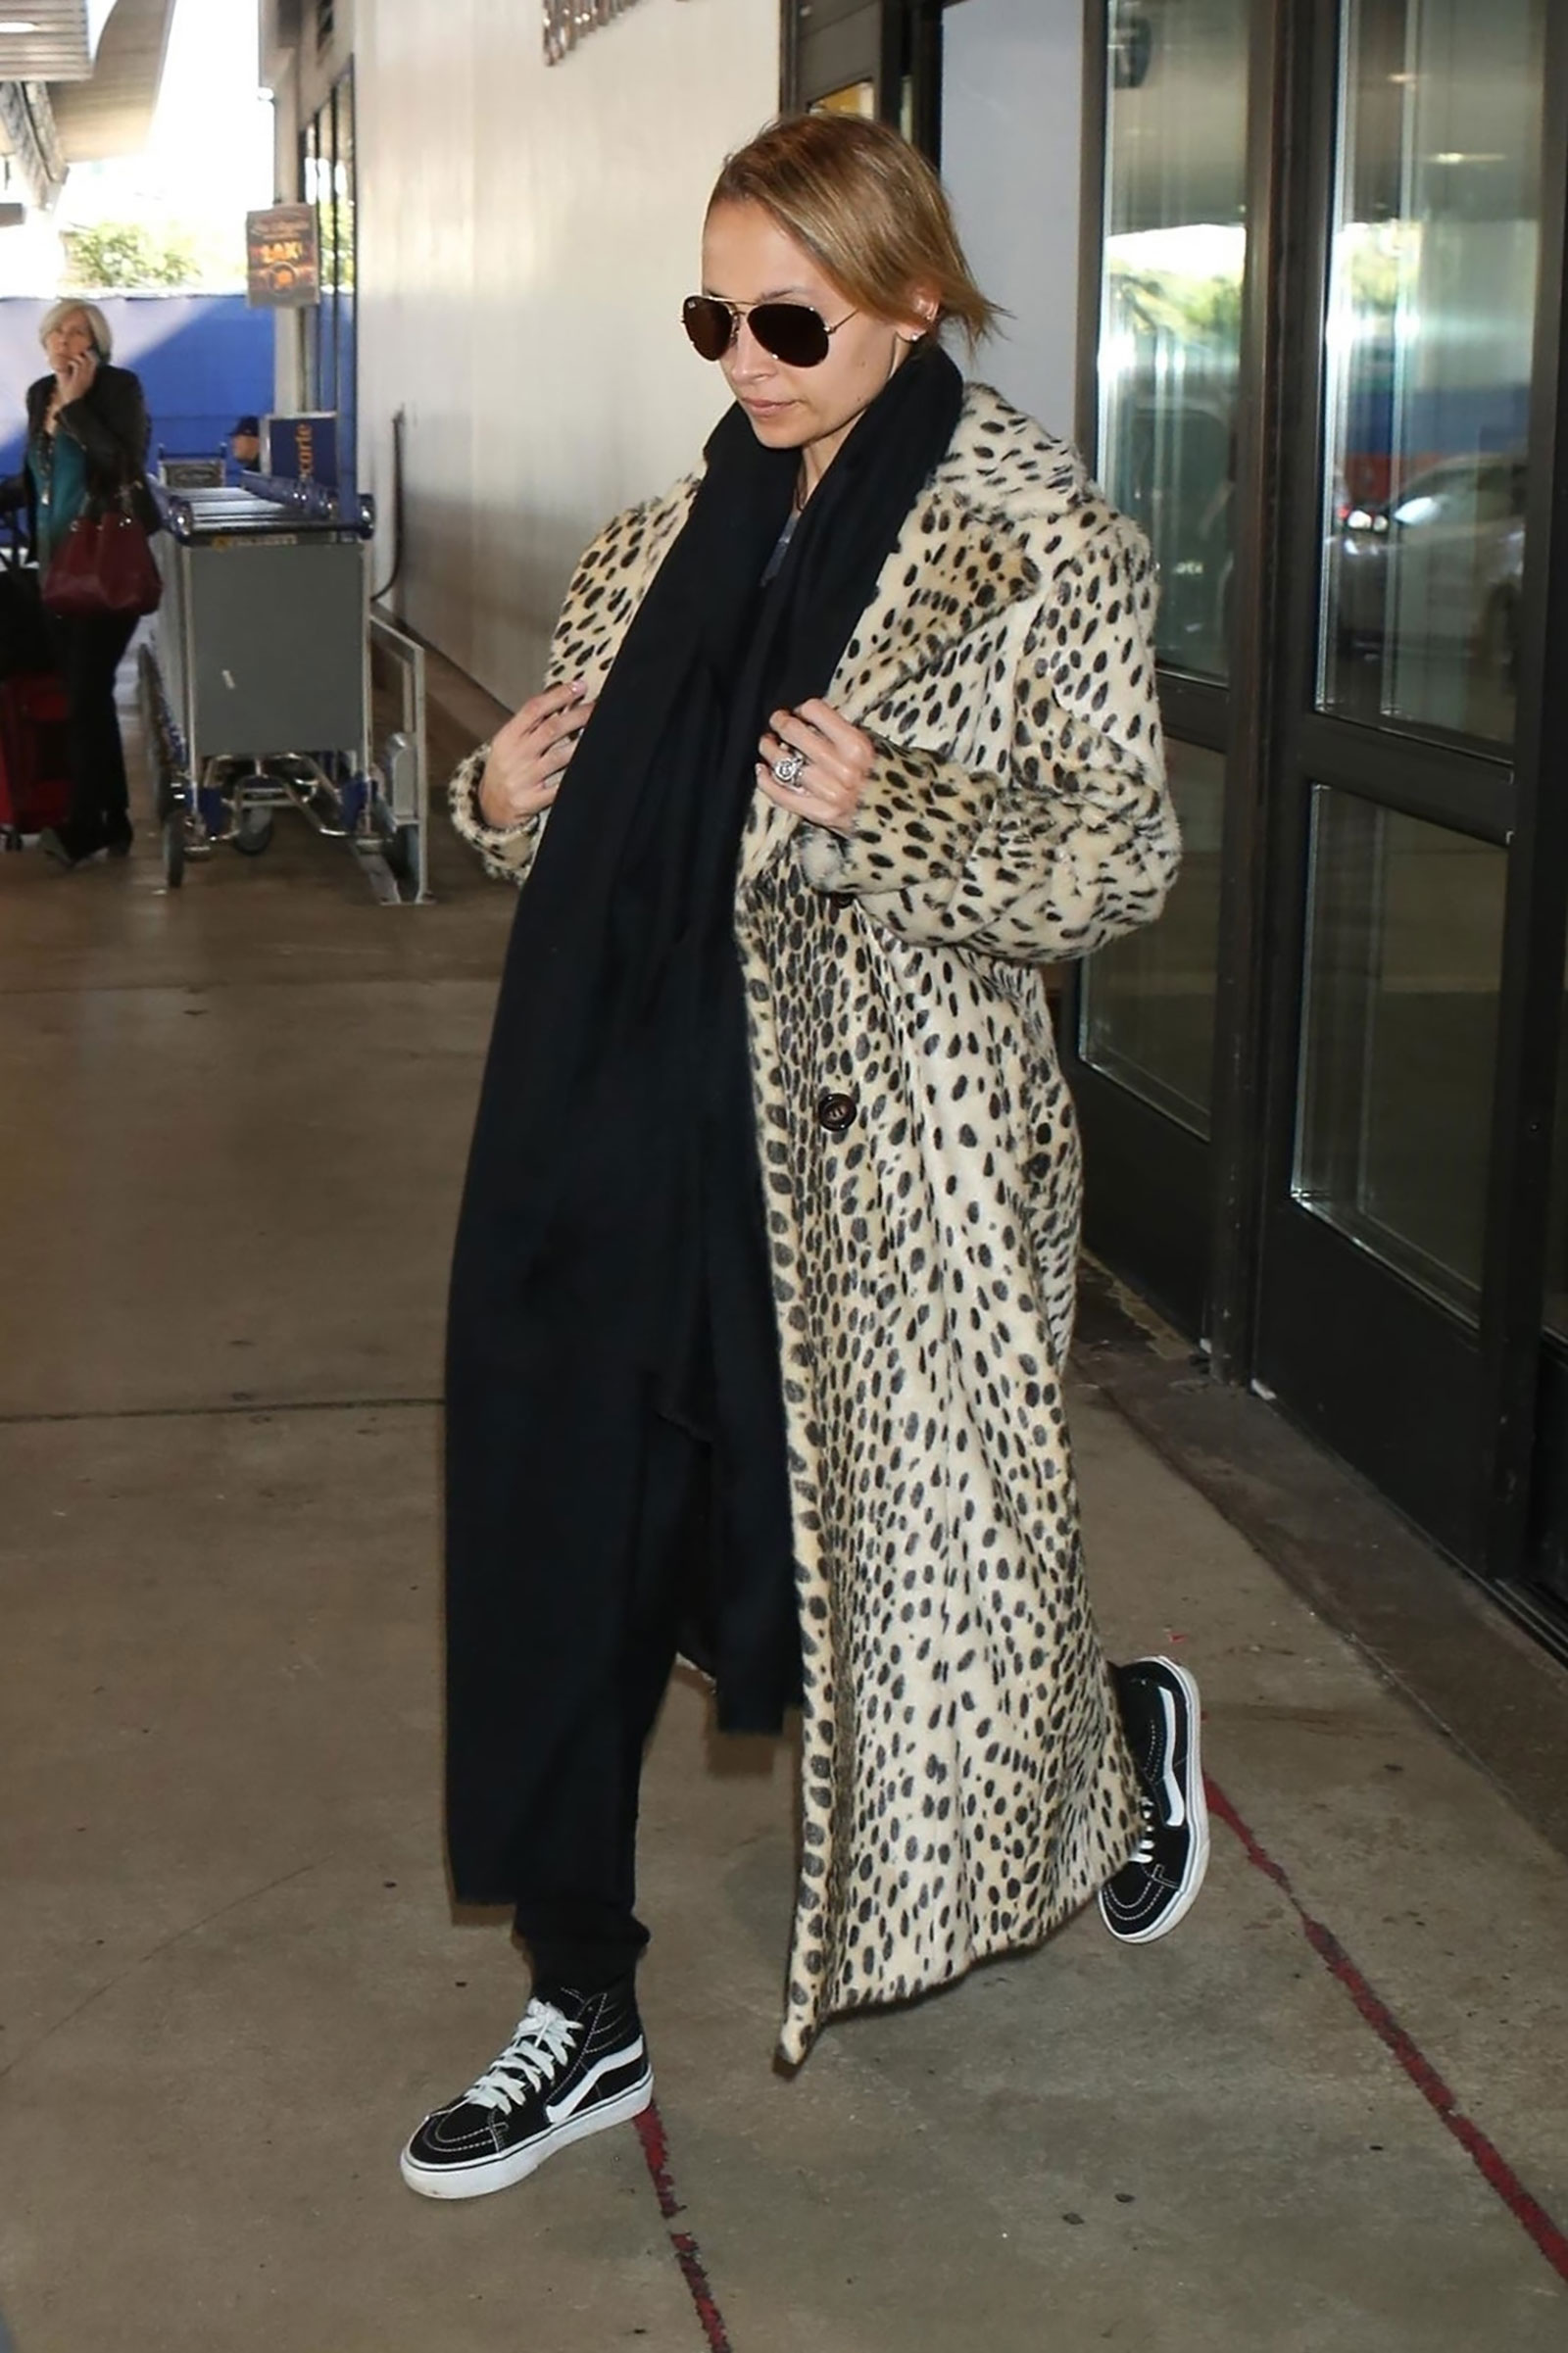 Nicole Richie wears a leopard coat with Vans sneakers for travel